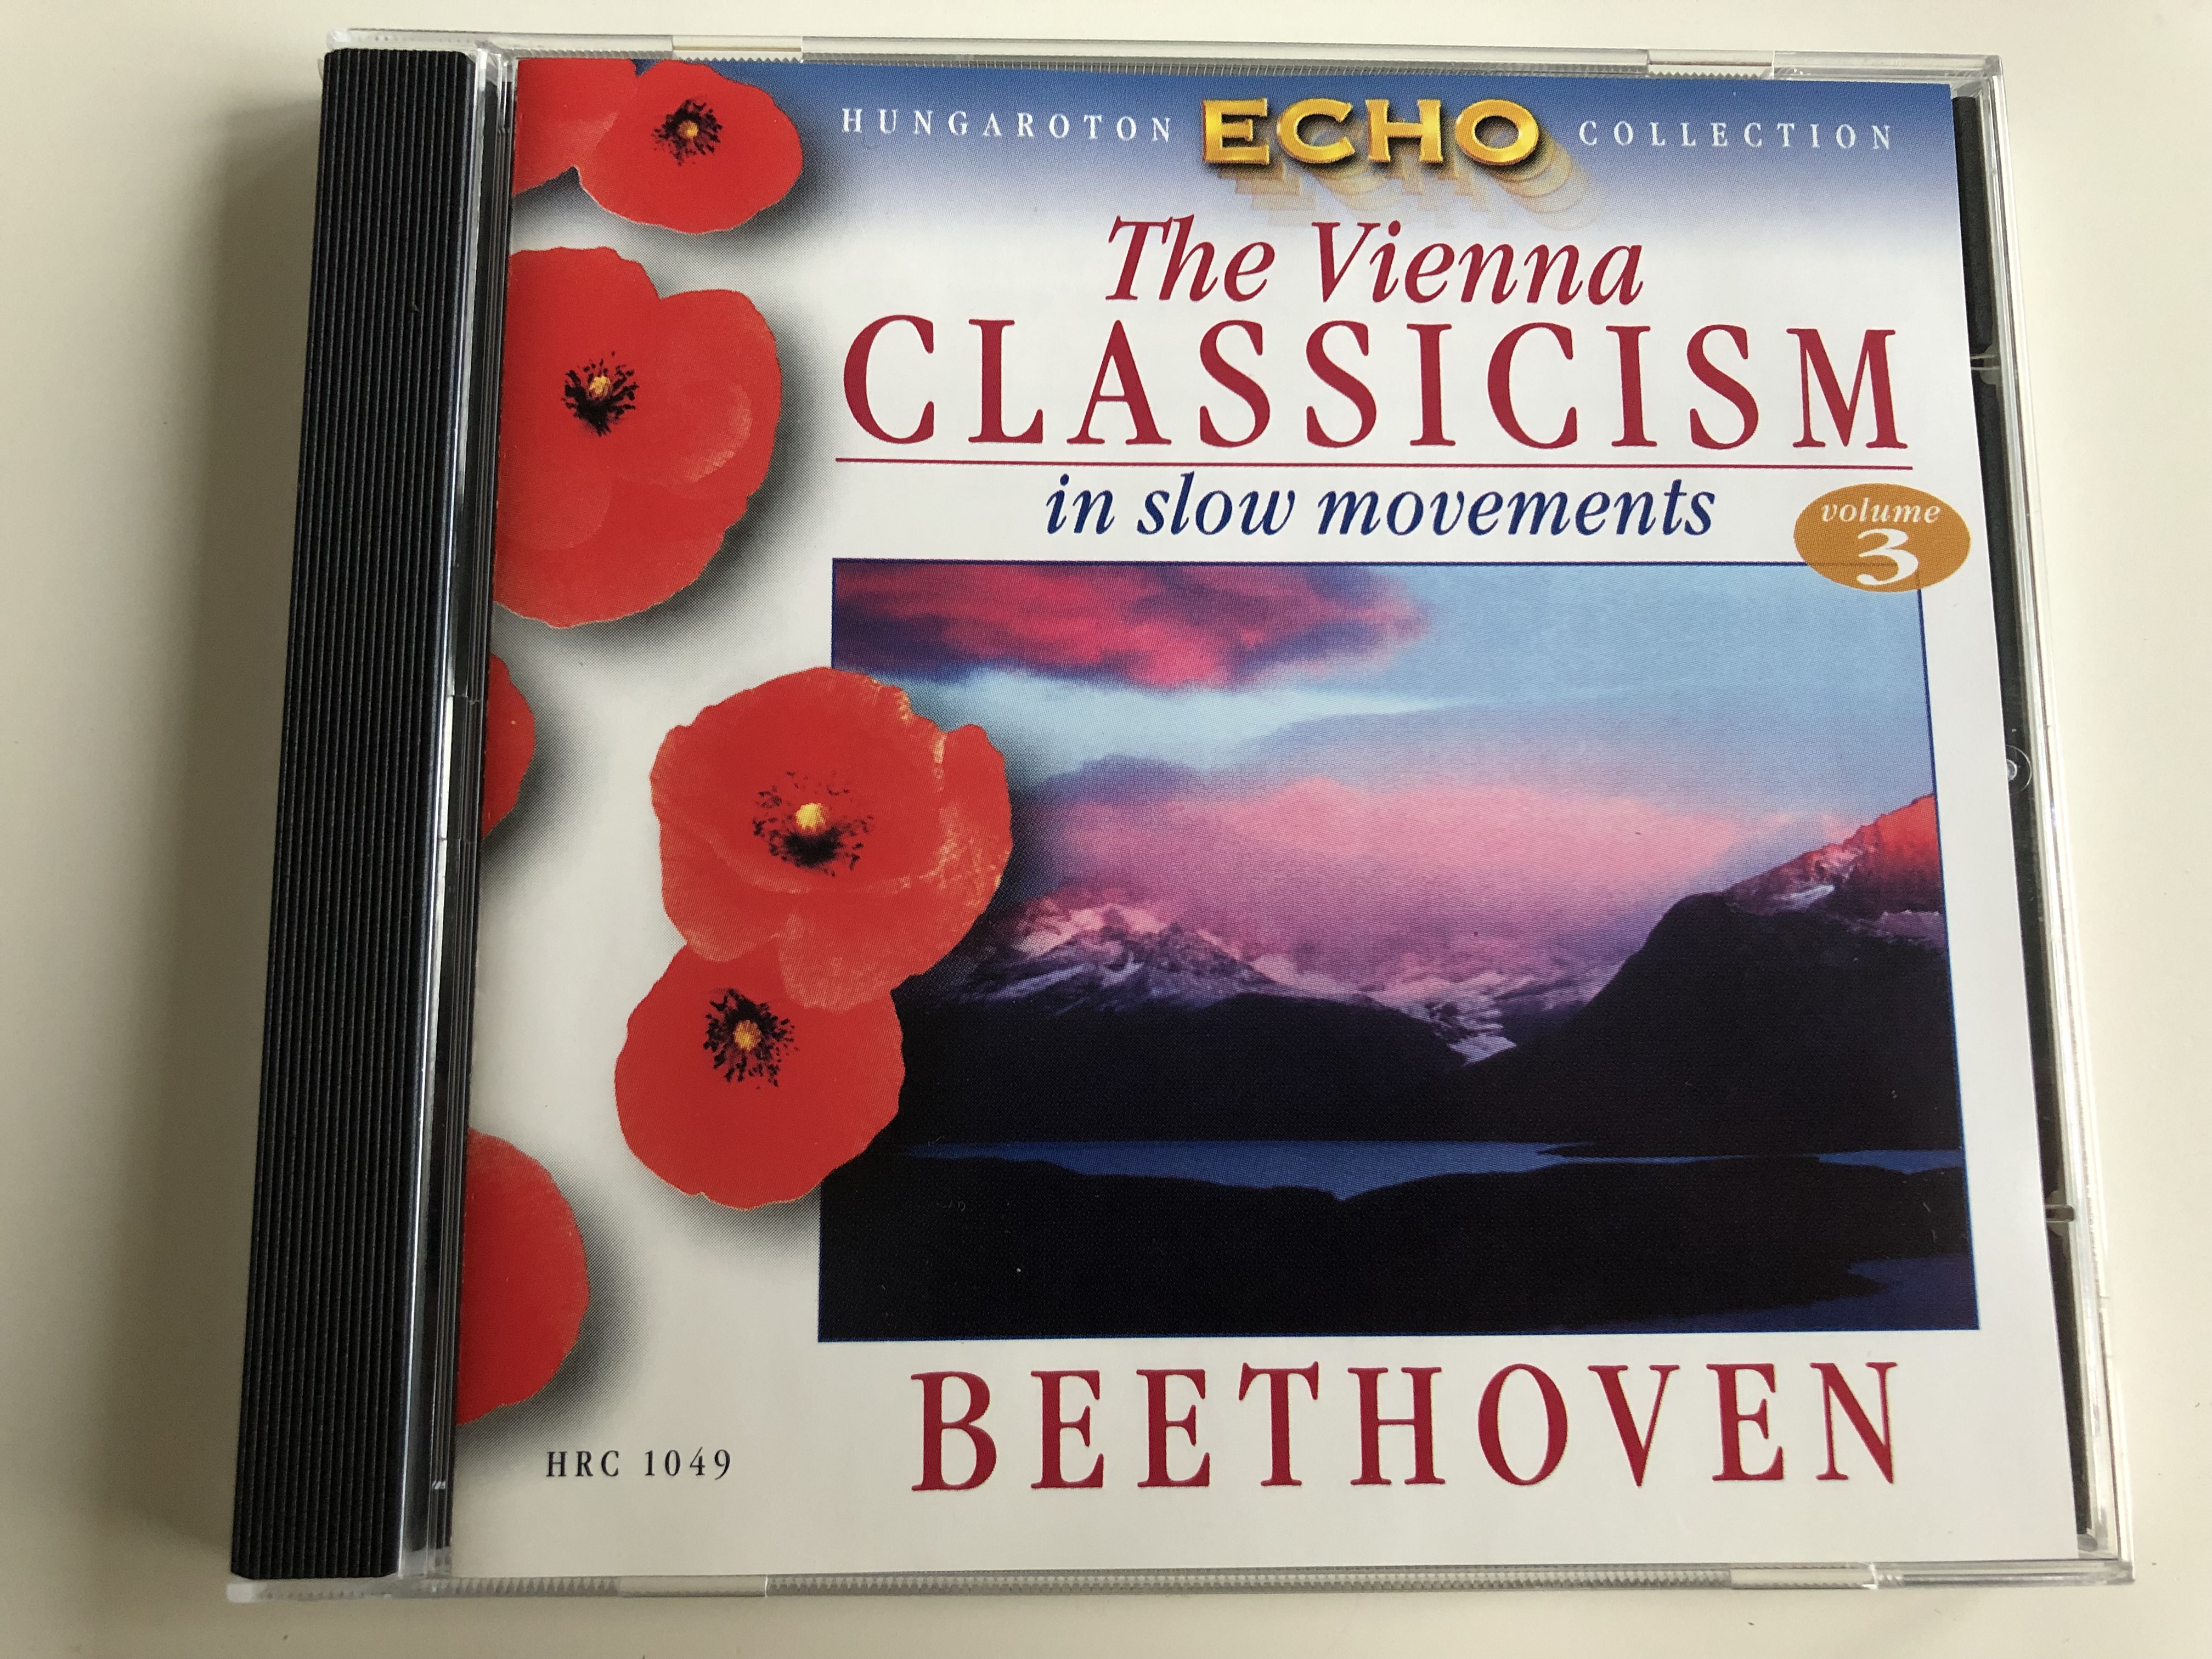 the-vienna-classicism-in-slow-movements-vol-3.-beethoven-hungaroton-echo-collection-hrc-1049-5991810104925-.jpg